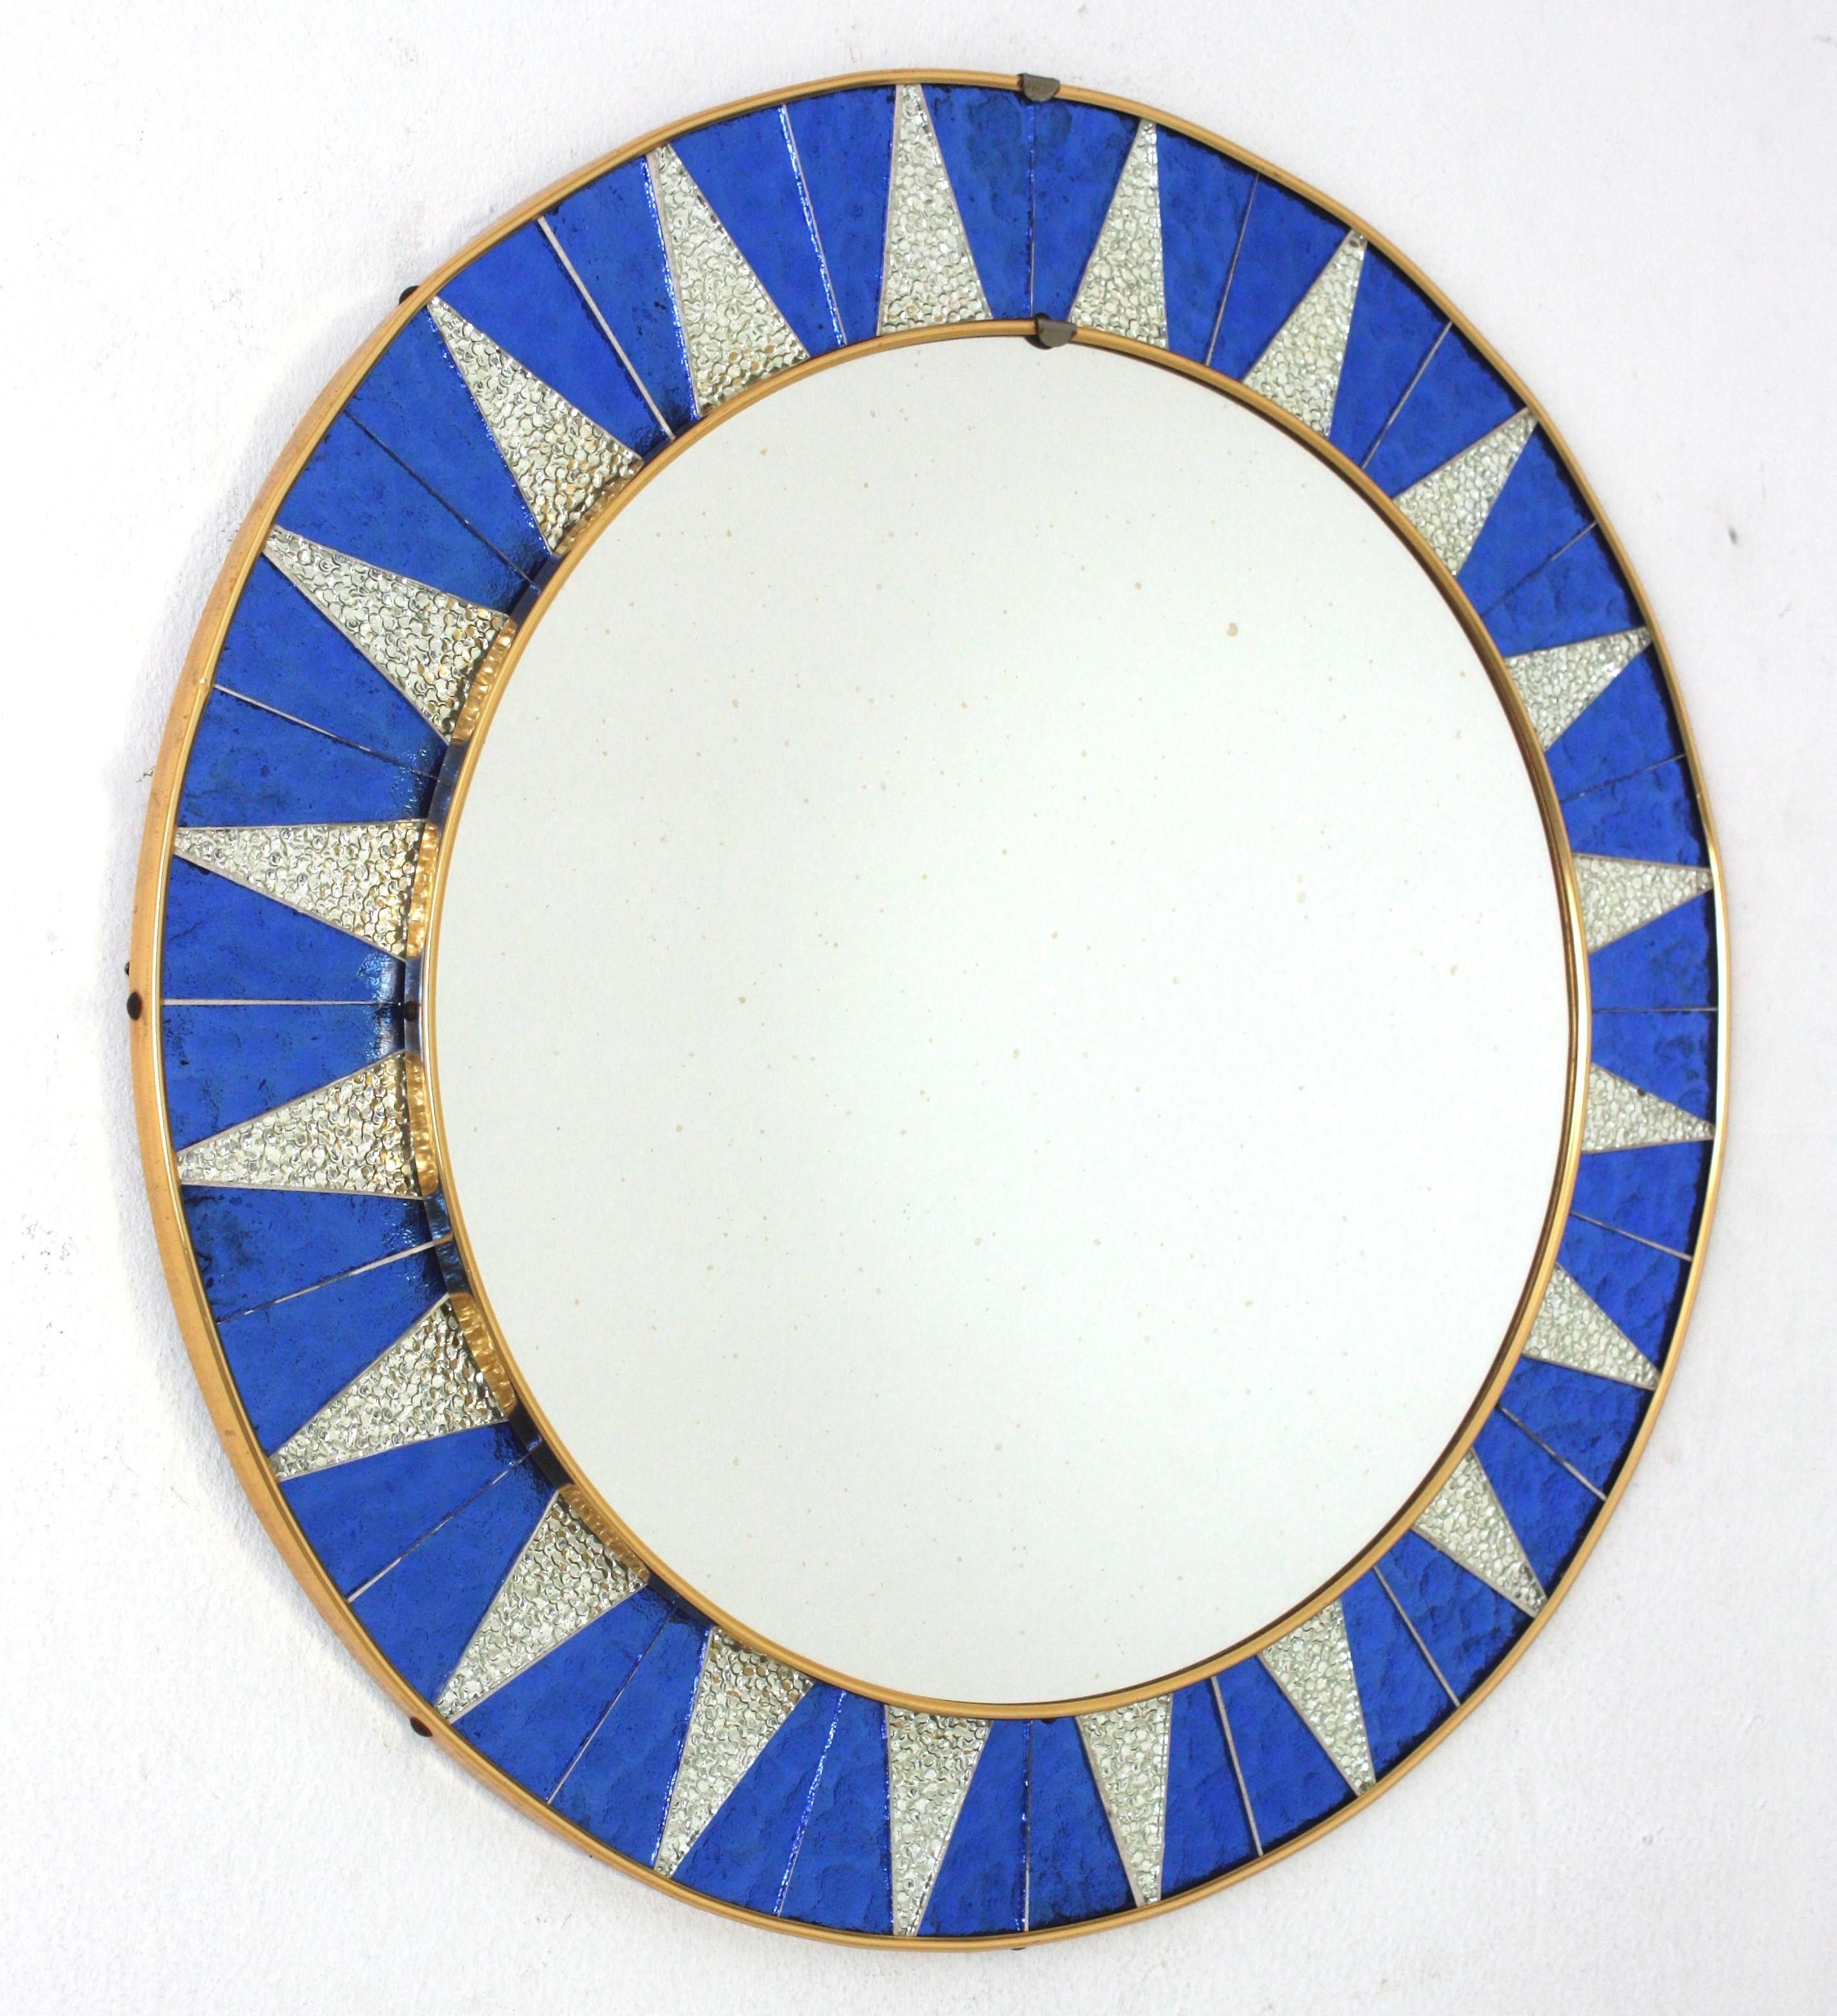 Sunburst Mirror with Blue and Silvered Mosaic Glass Frame, Spain, 1960s For Sale 3